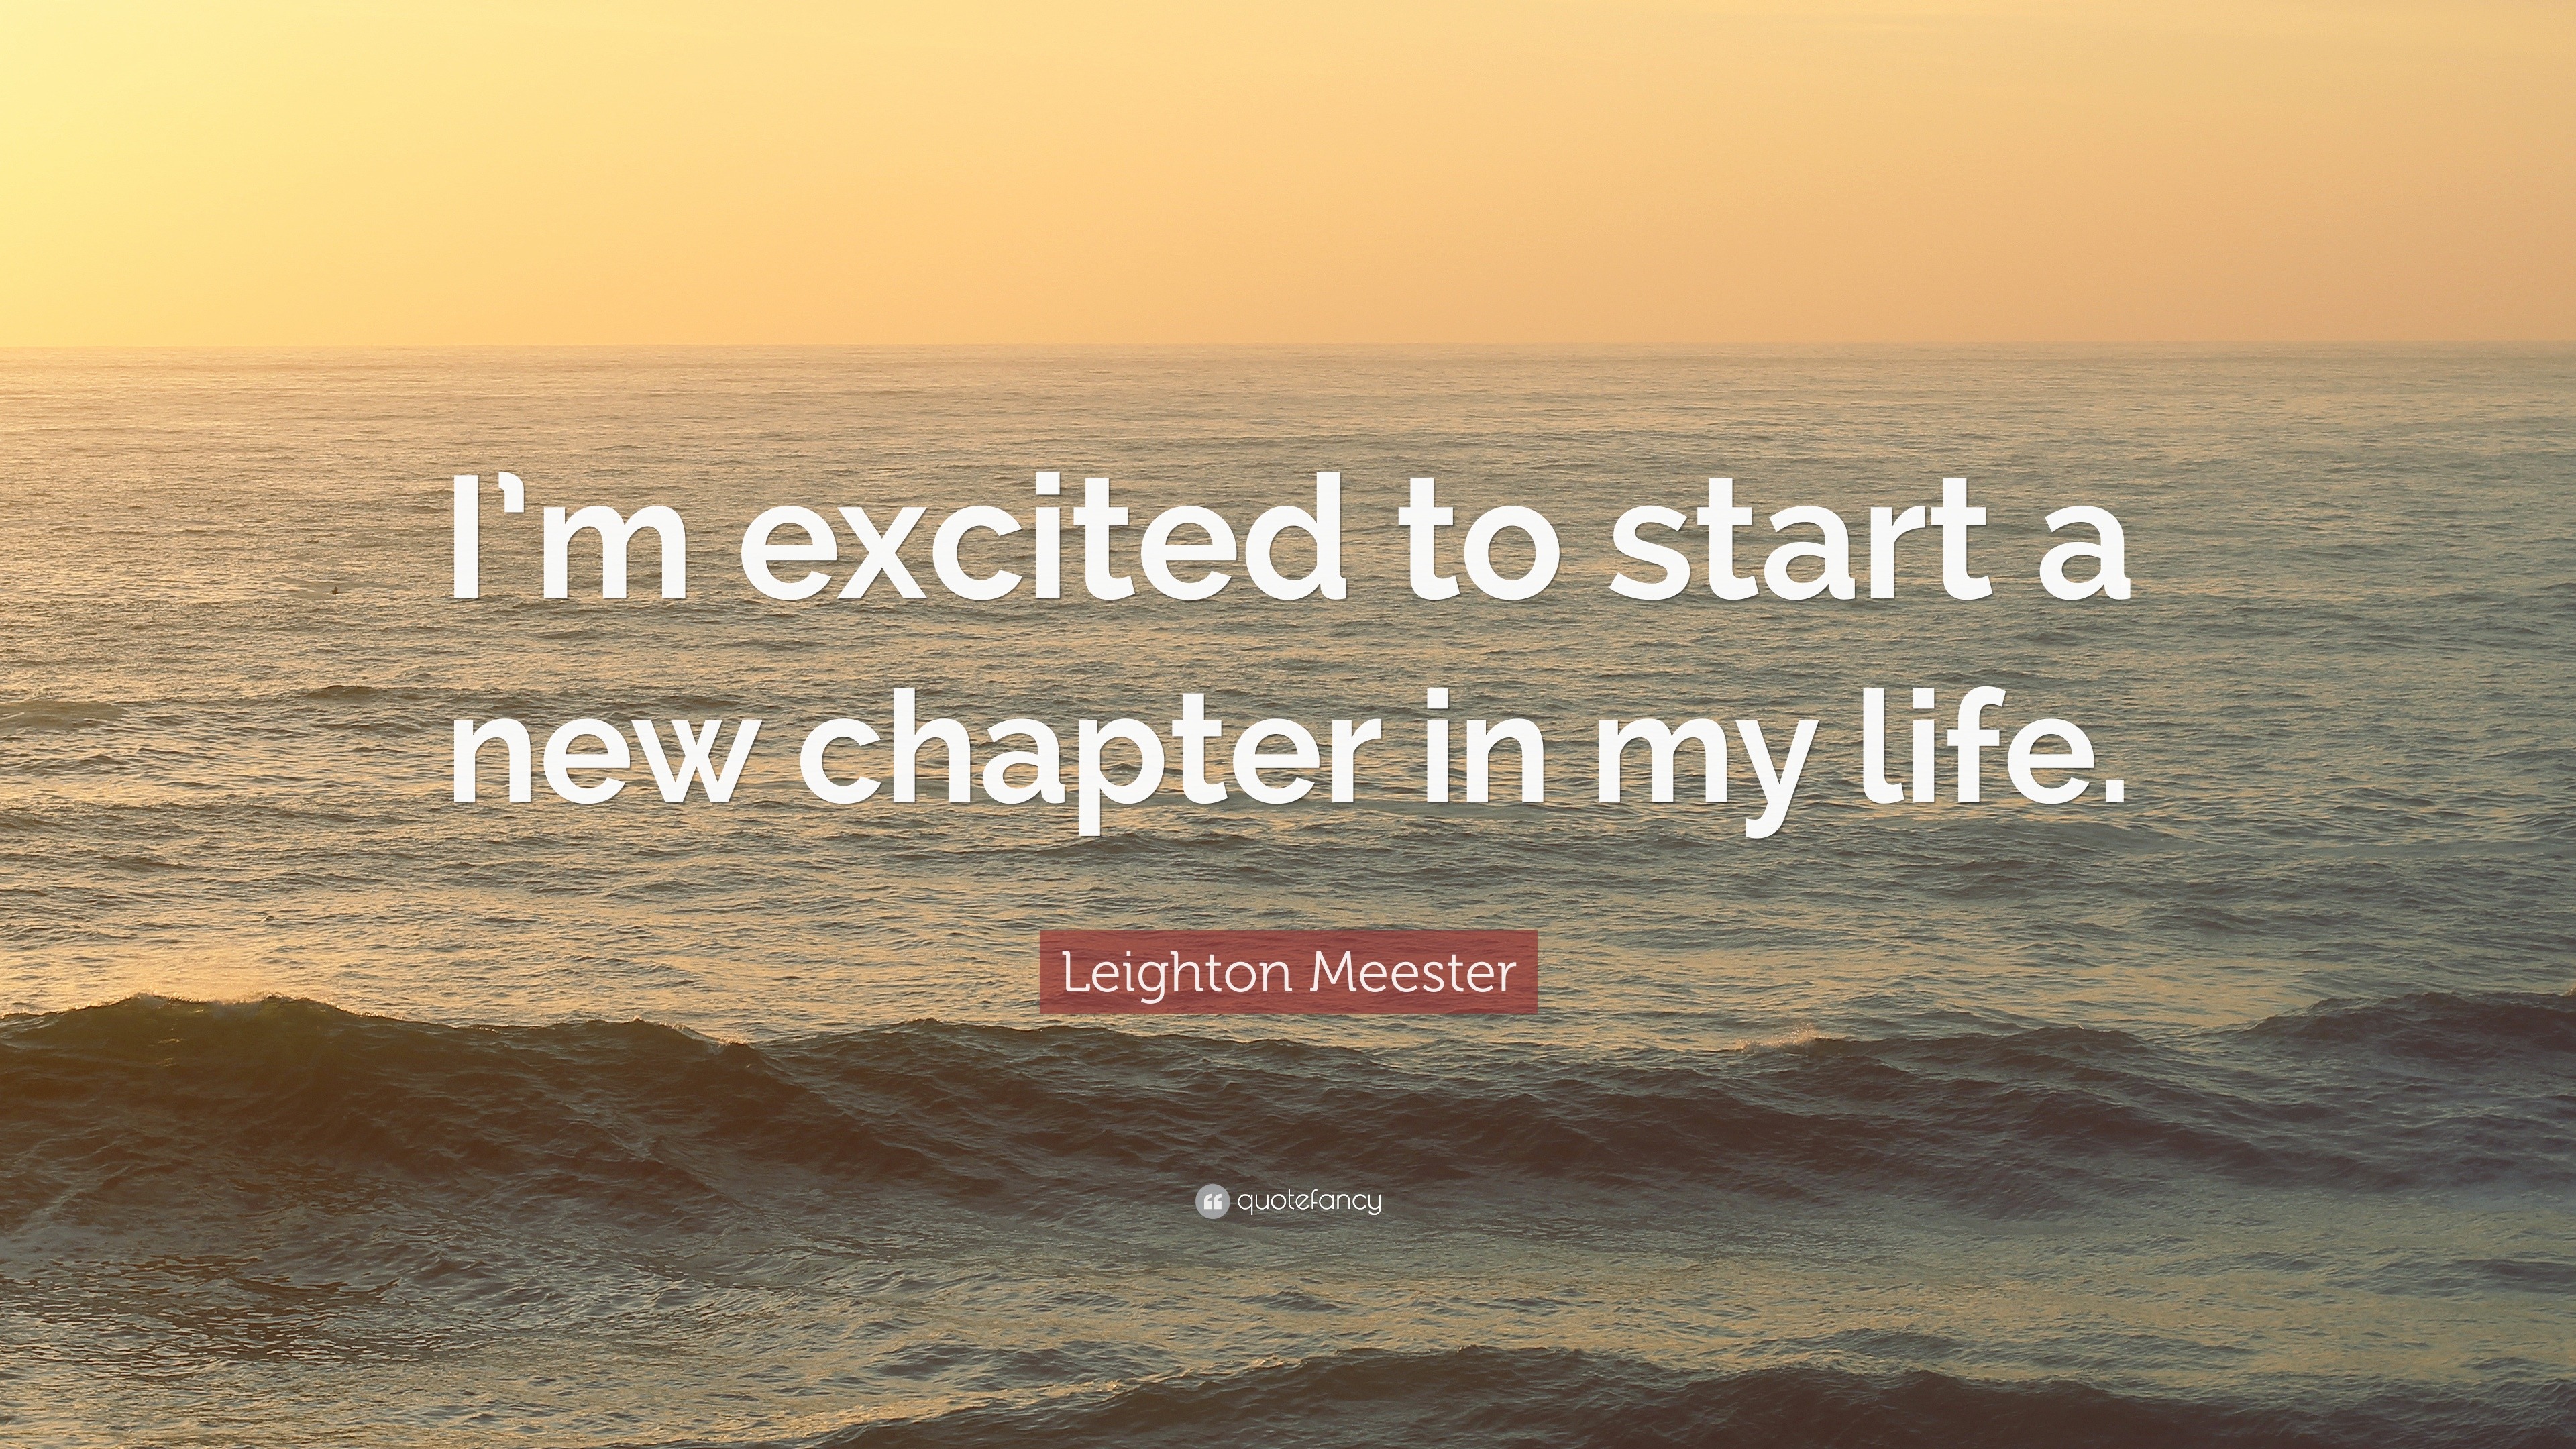 Leighton Meester Quote: "I'm excited to start a new ...